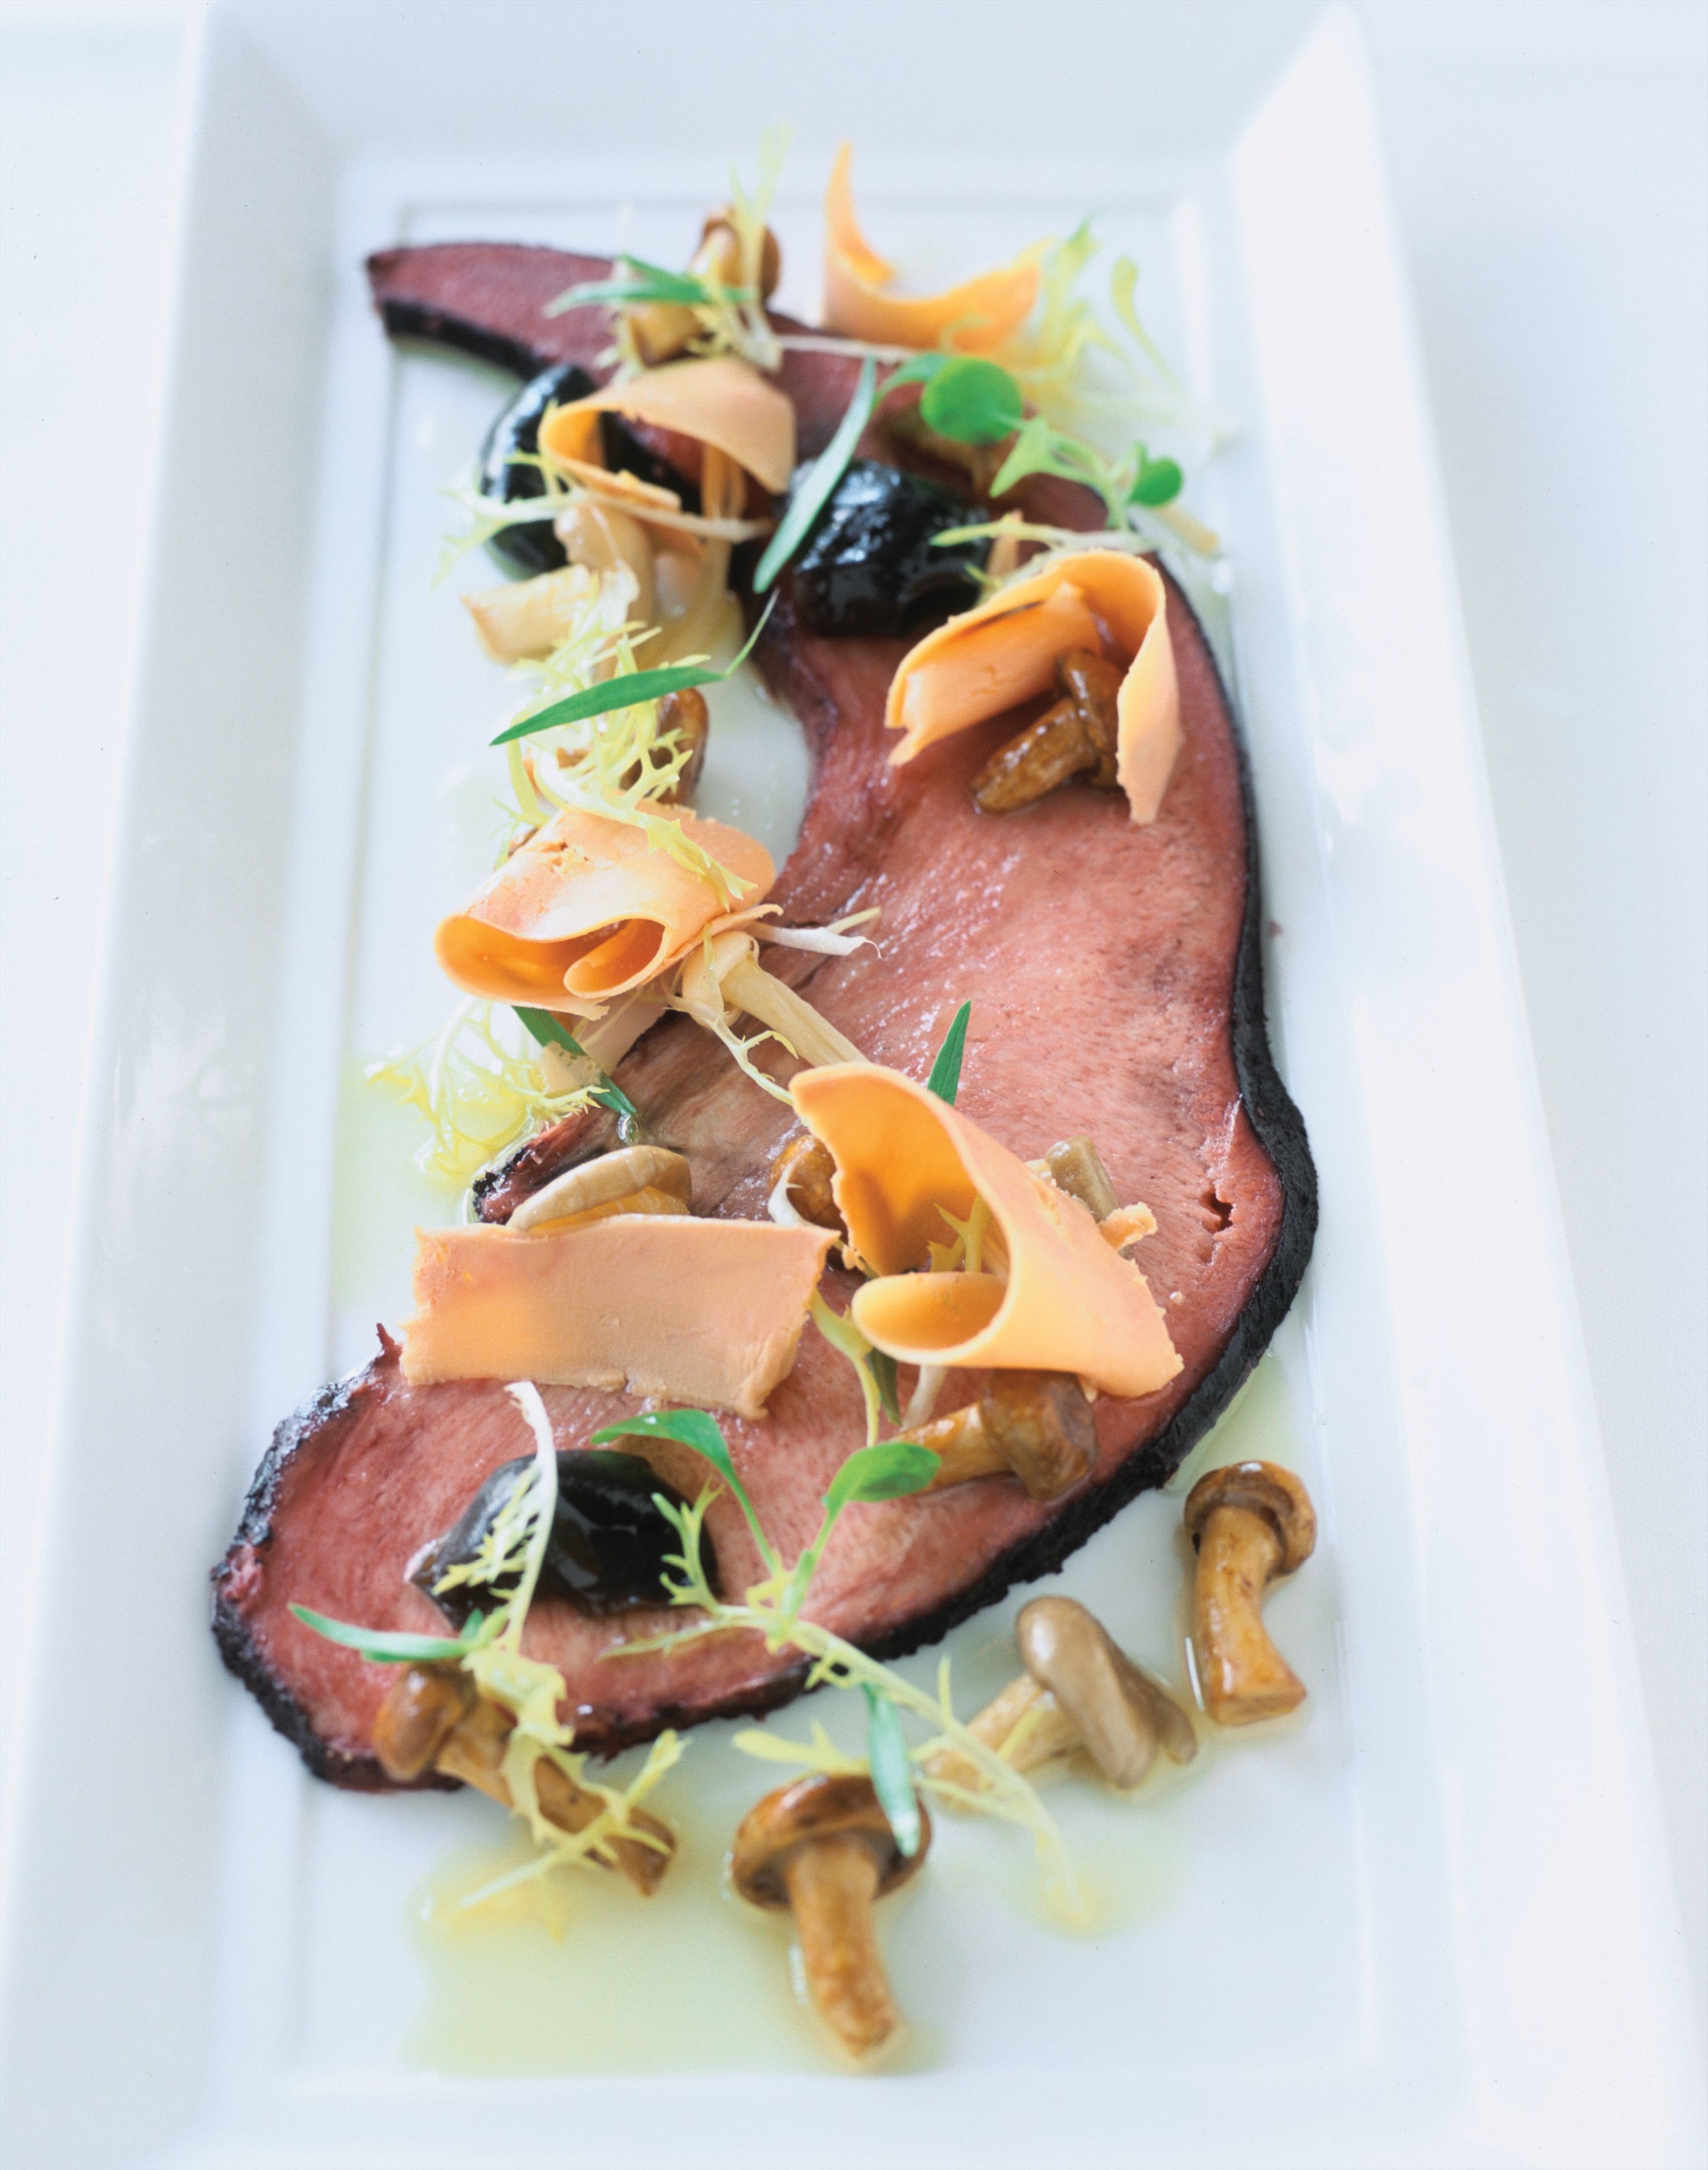 Pickled wagyu tongue with mushrooms à la grecque and shaved foie gras